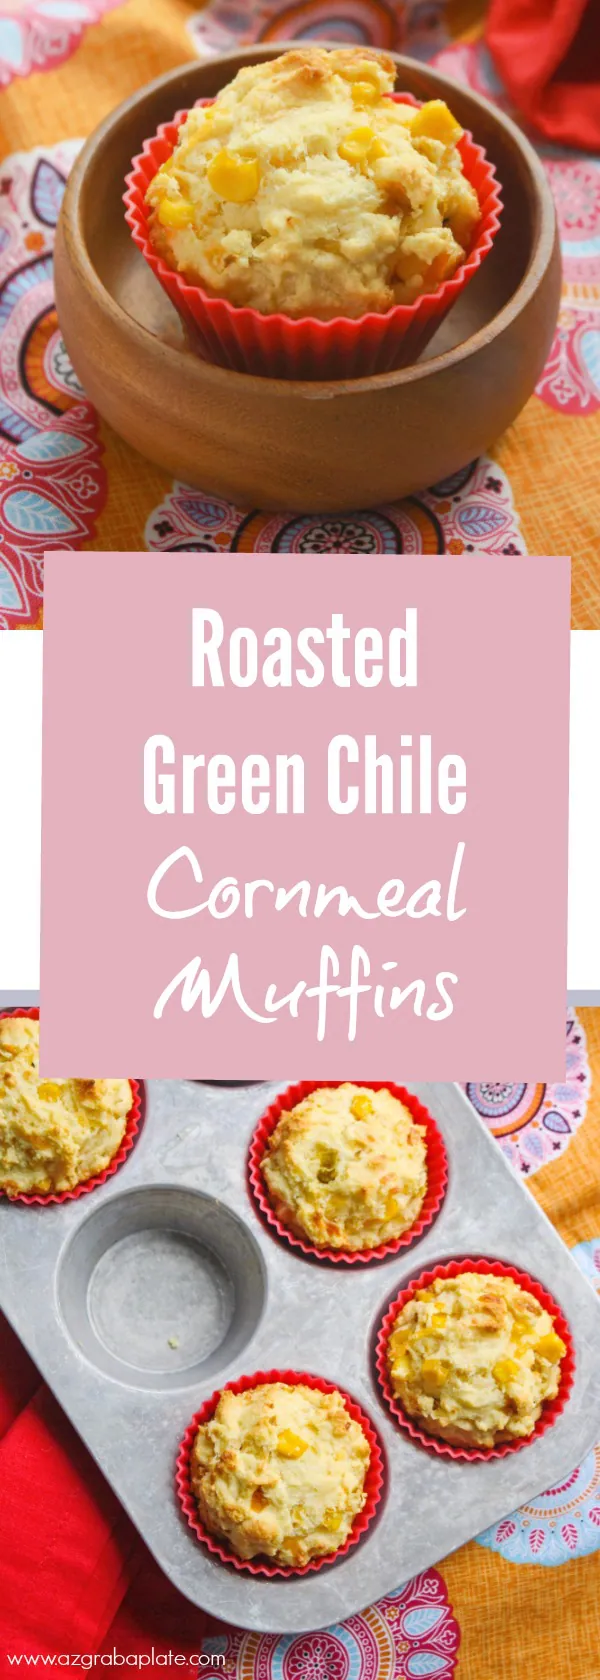 Roasted Green Chile Cornbread Muffins are a real treat to serve on the side of so many meals. They're tasty with chicken, chili, salad, and more!